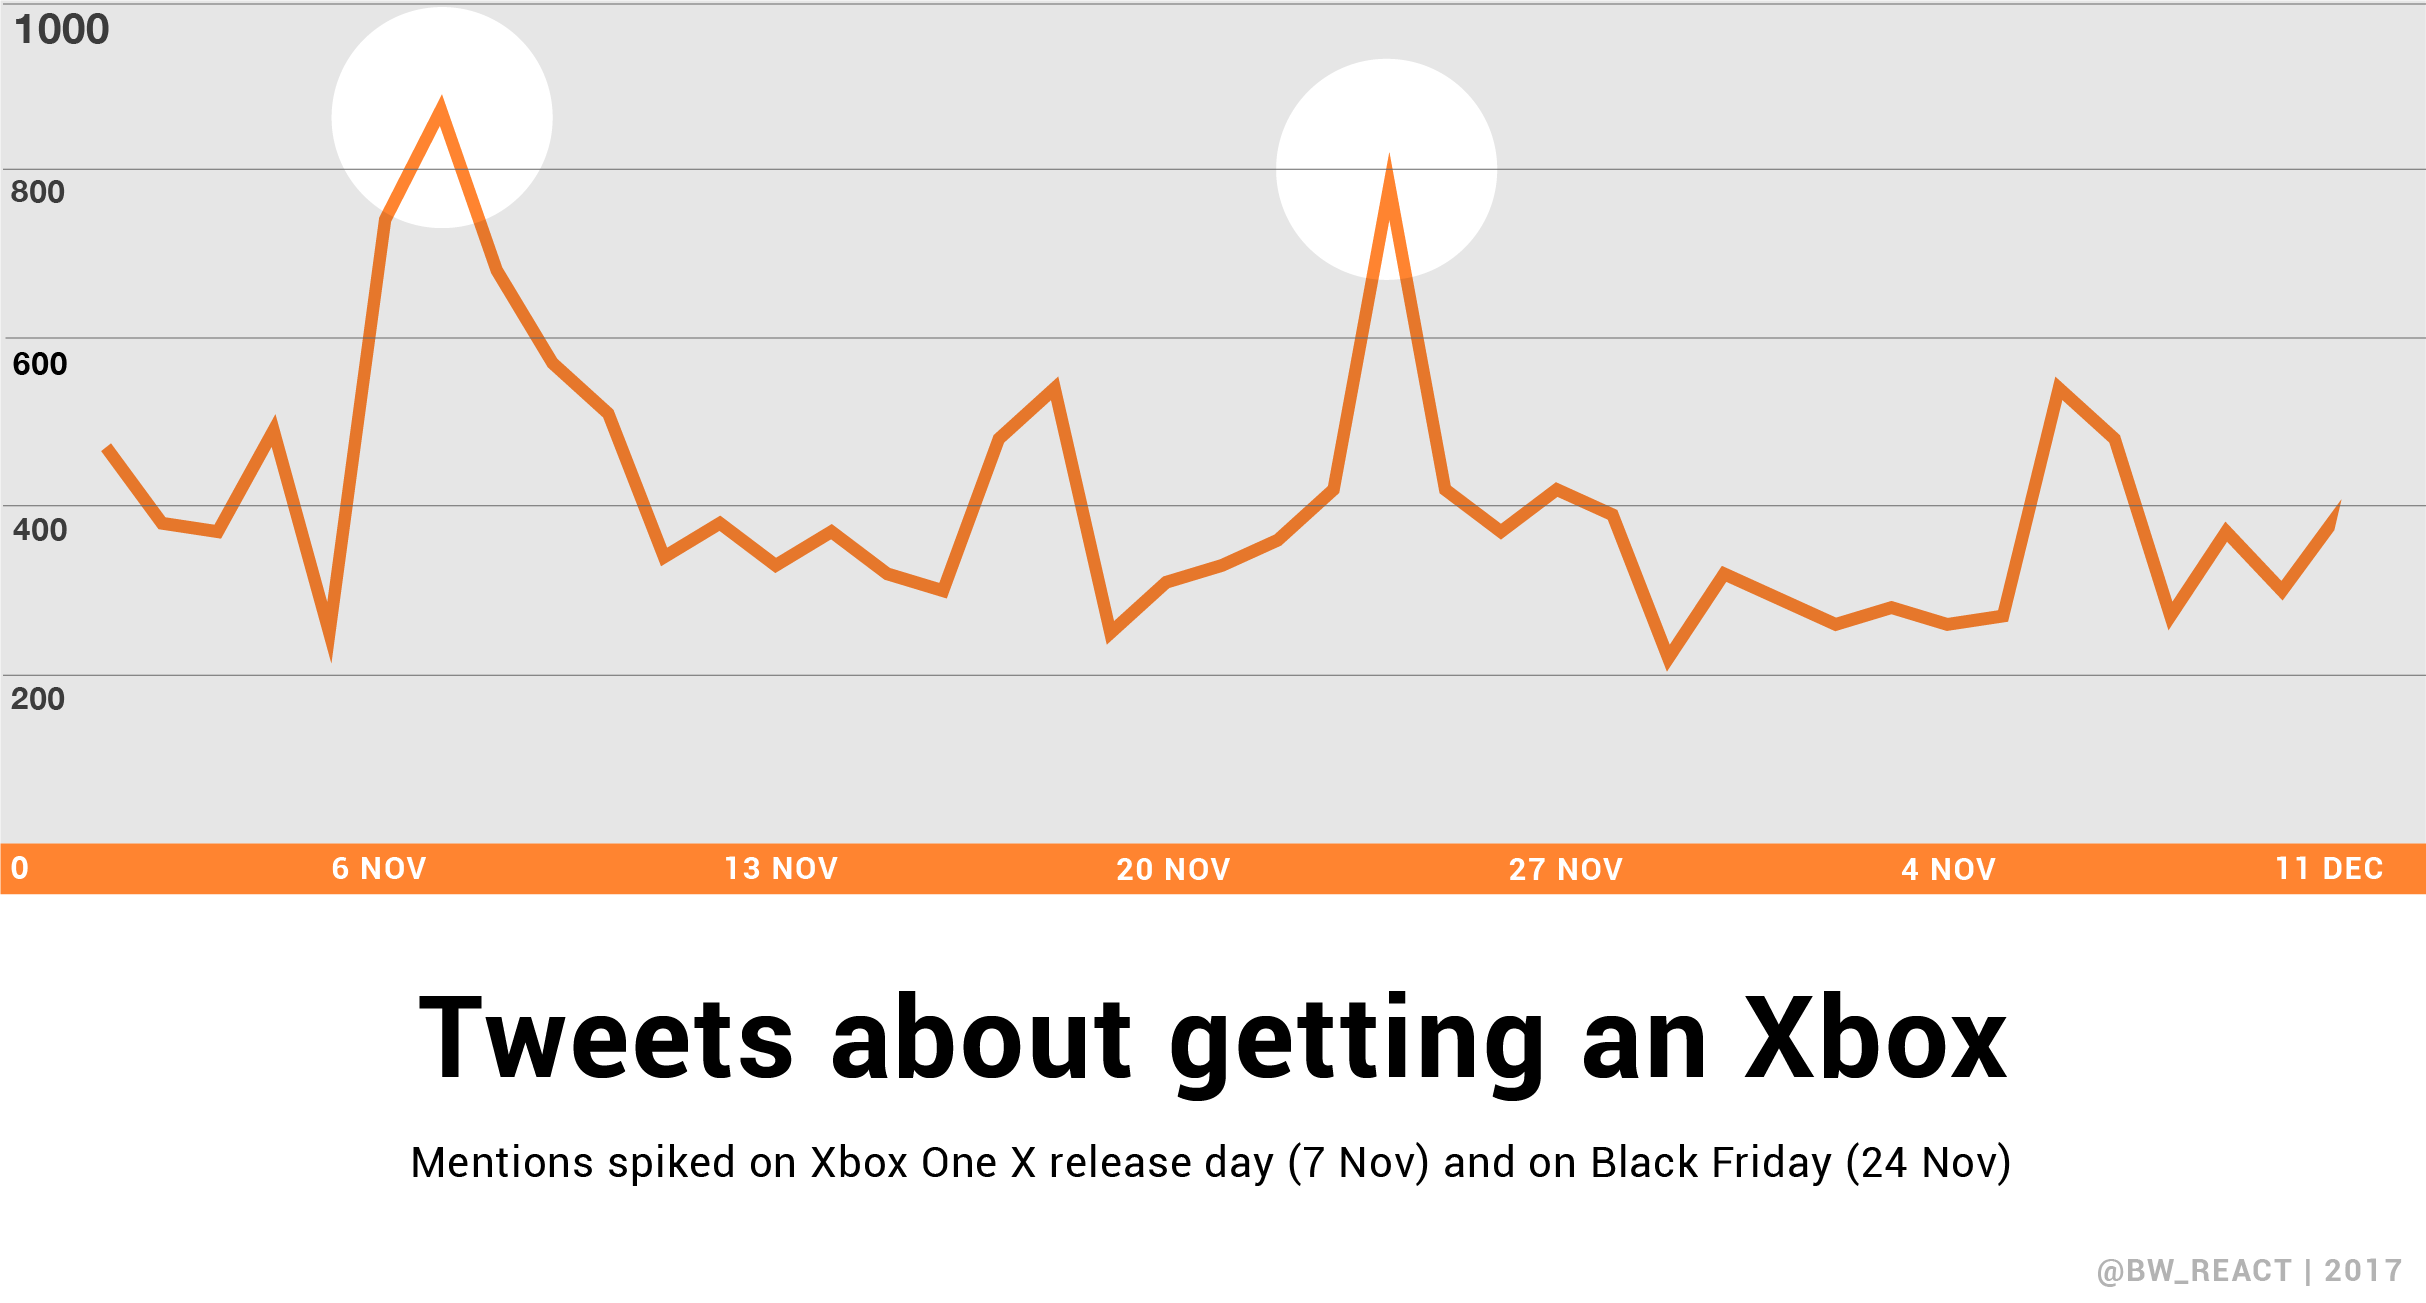 Mentions of intent to purchase an Xbox rise on Xbox X launch day and Black Friday